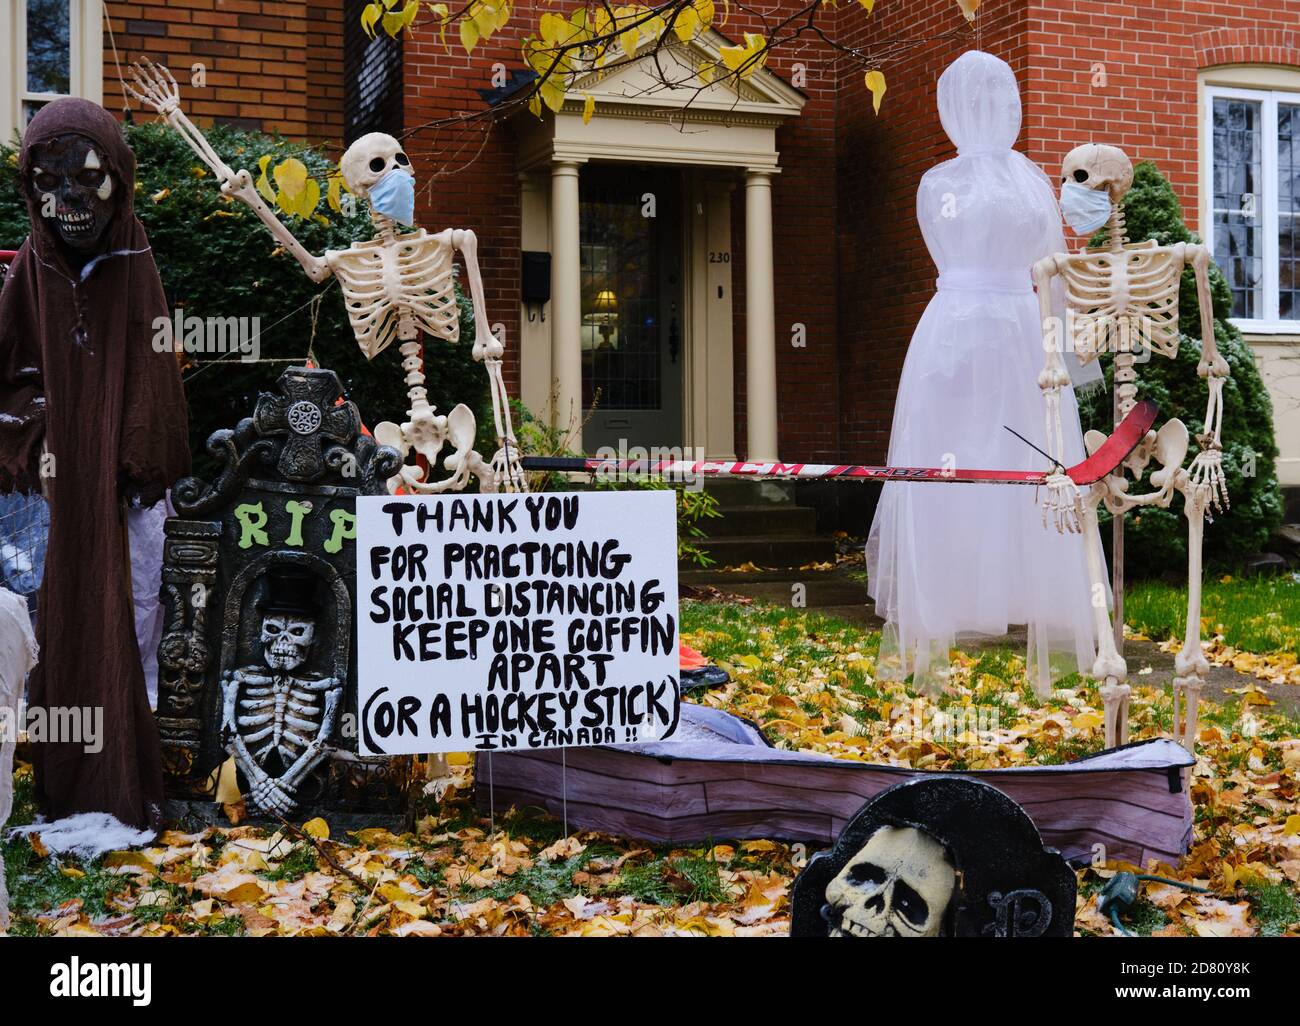 Ottawa, Canada. October 26th, 2020. Covid 19 themed Halloween decorations  set up at the front of a house in The Glebe. Skeleton wearing a mask, and  in Canadian fashion asking people to